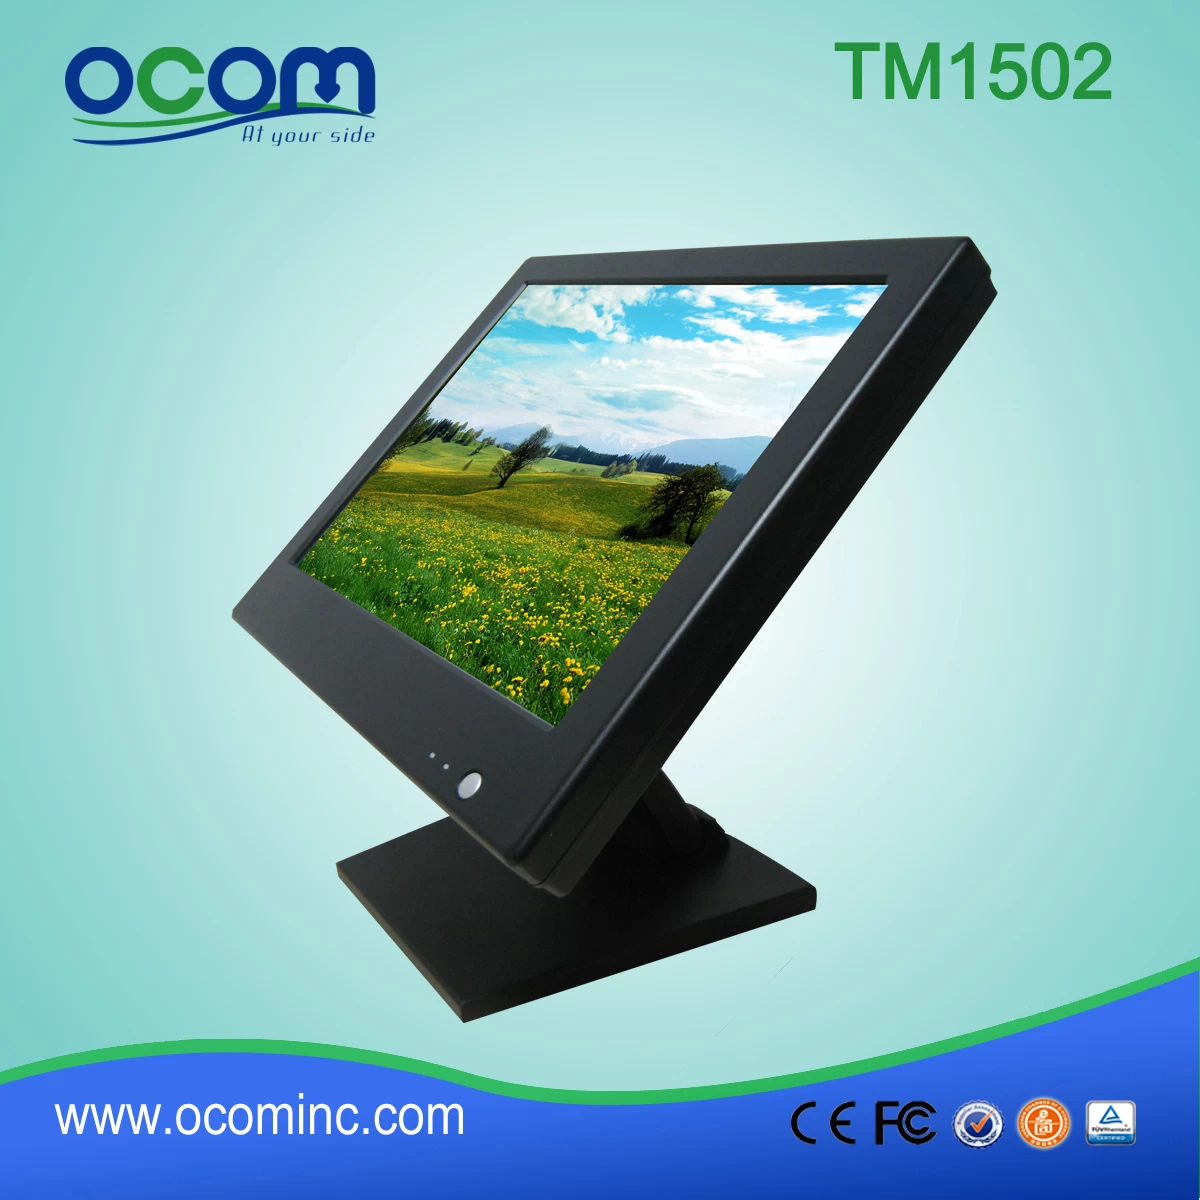 TM1502 Waterproof 15" Touch LCD Screen Monitor